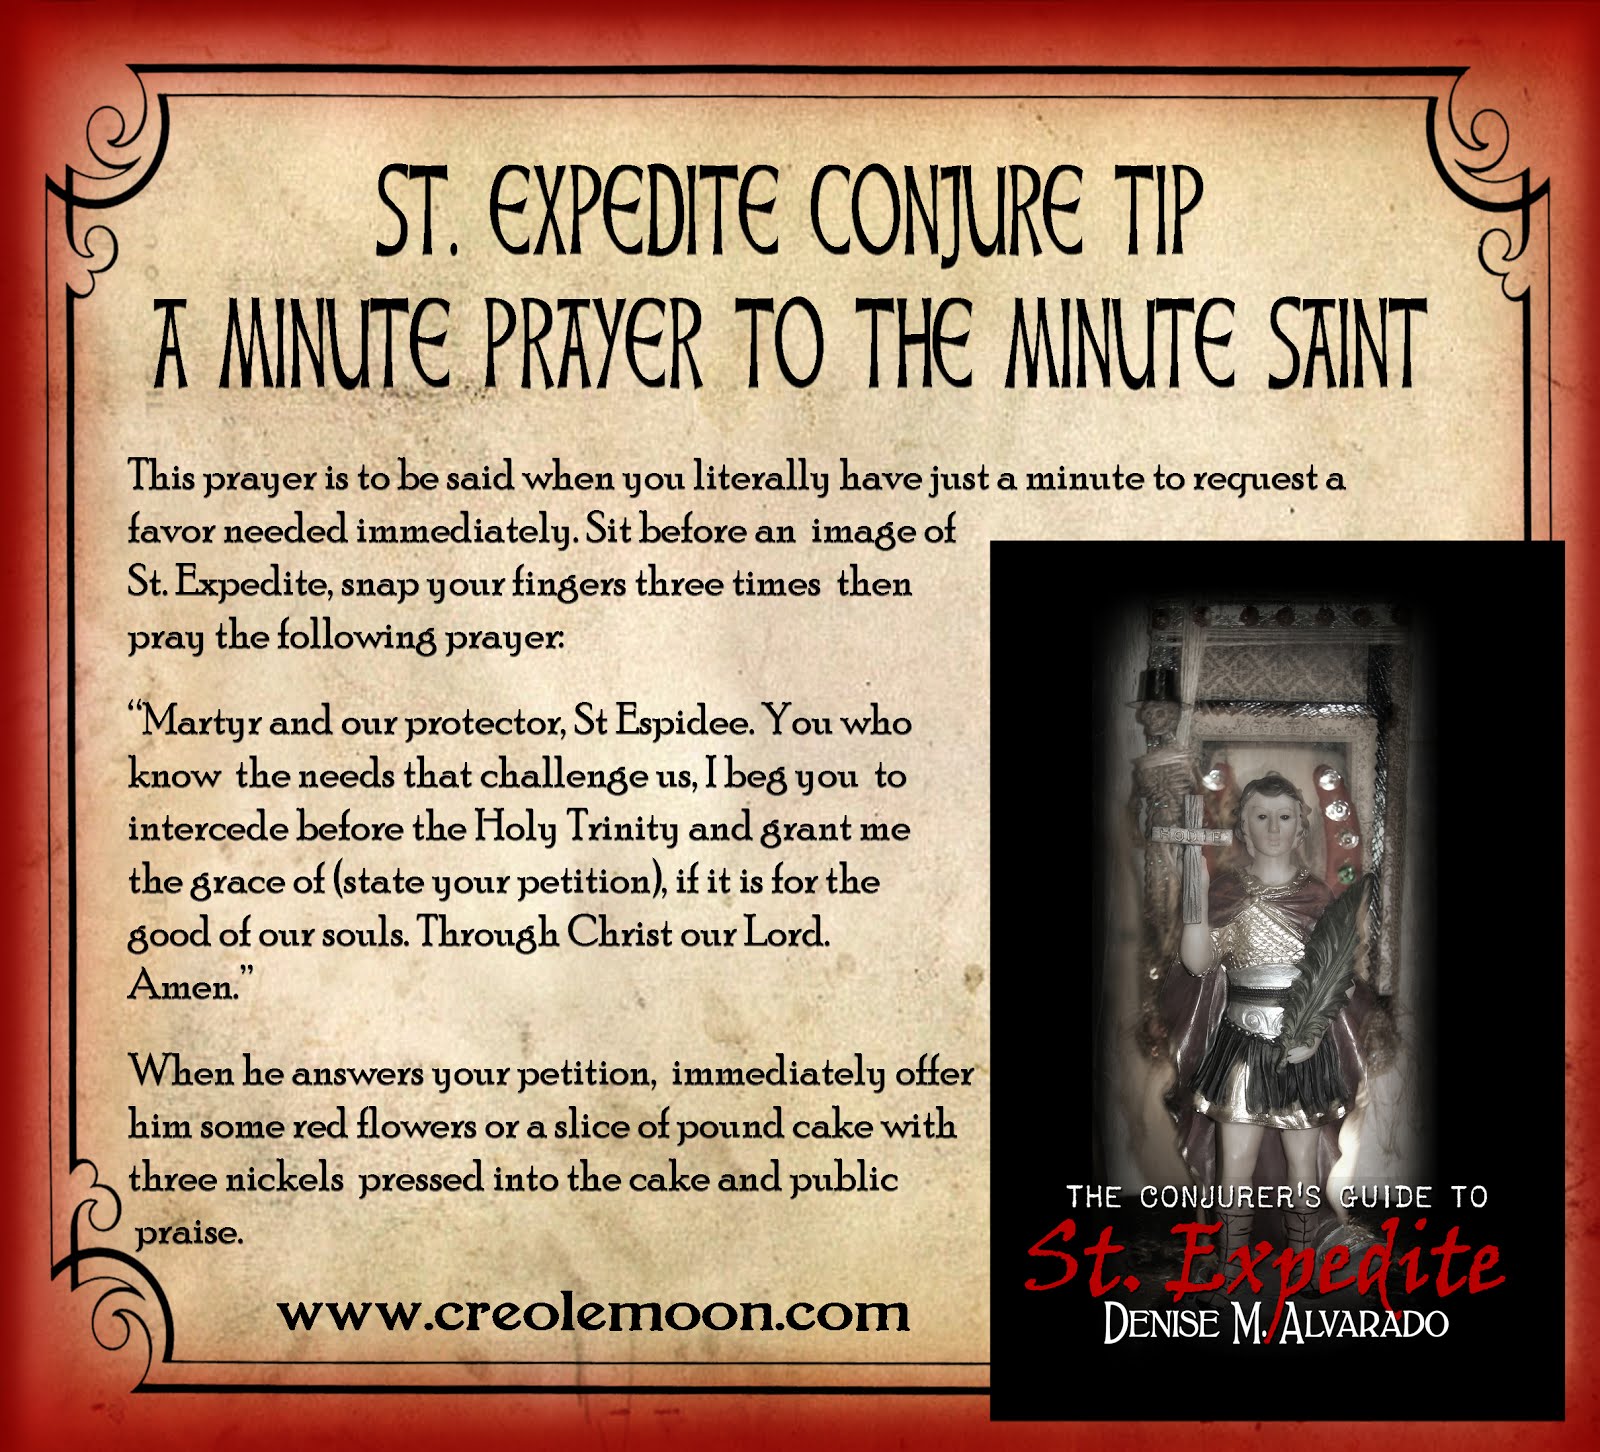 A Minute Prayer to the Minute Saint